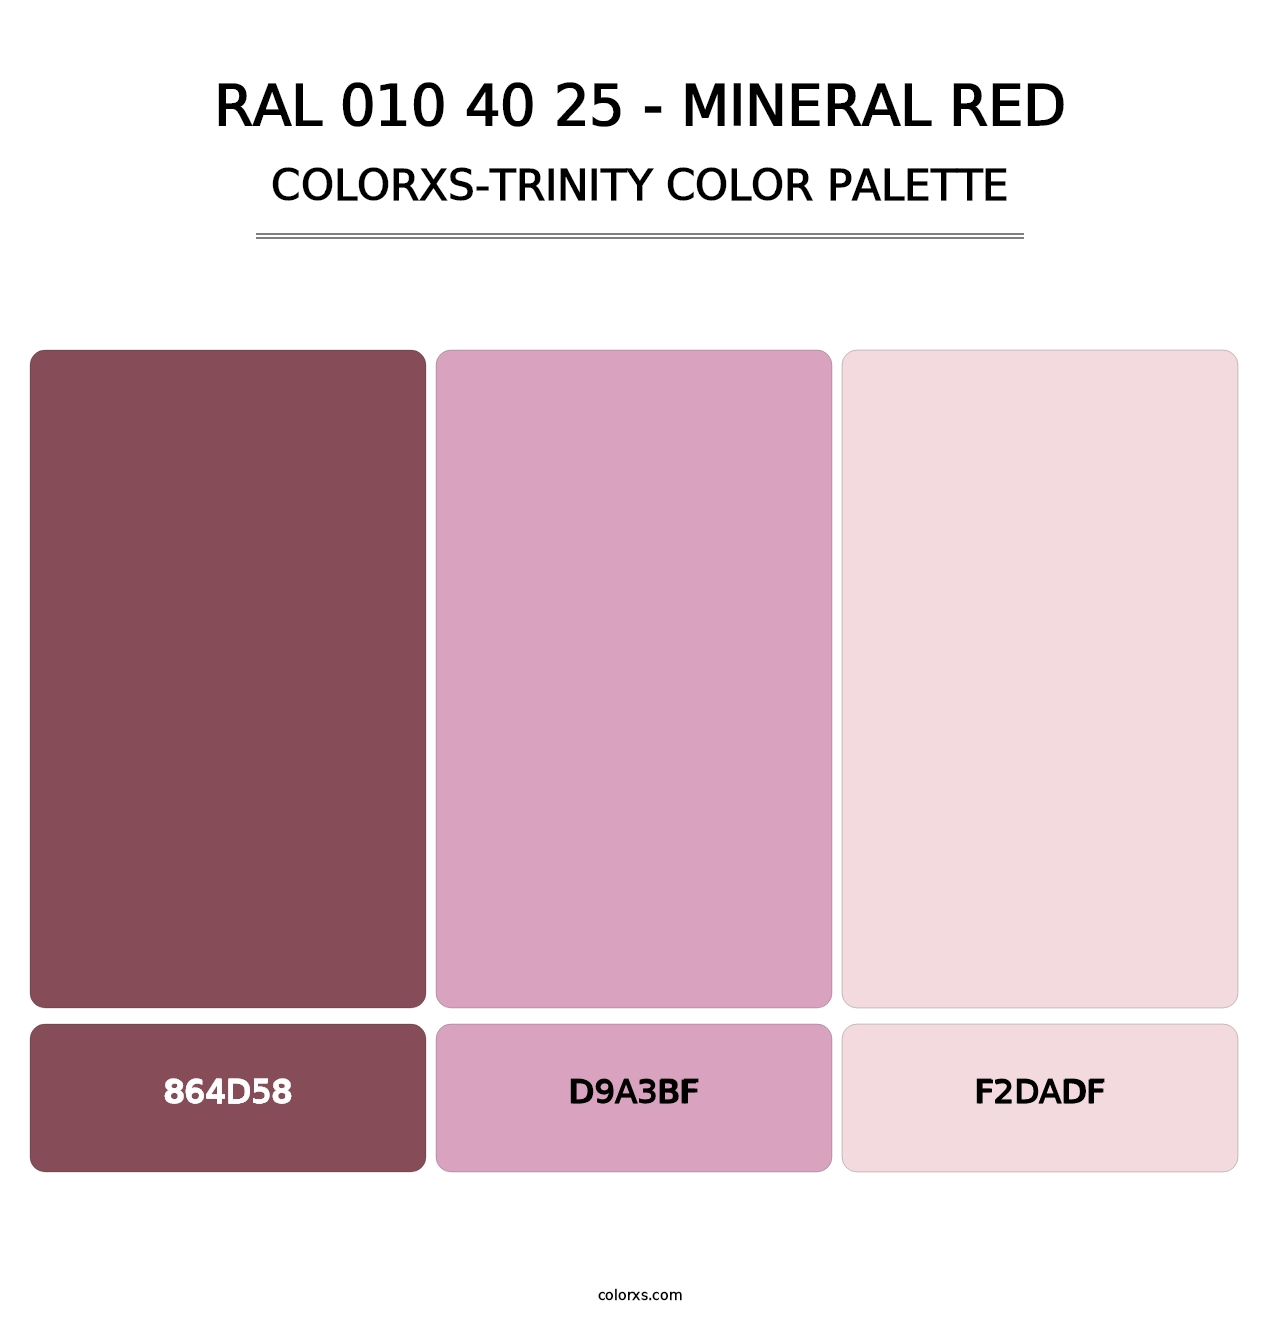 RAL 010 40 25 - Mineral Red - Colorxs Trinity Palette